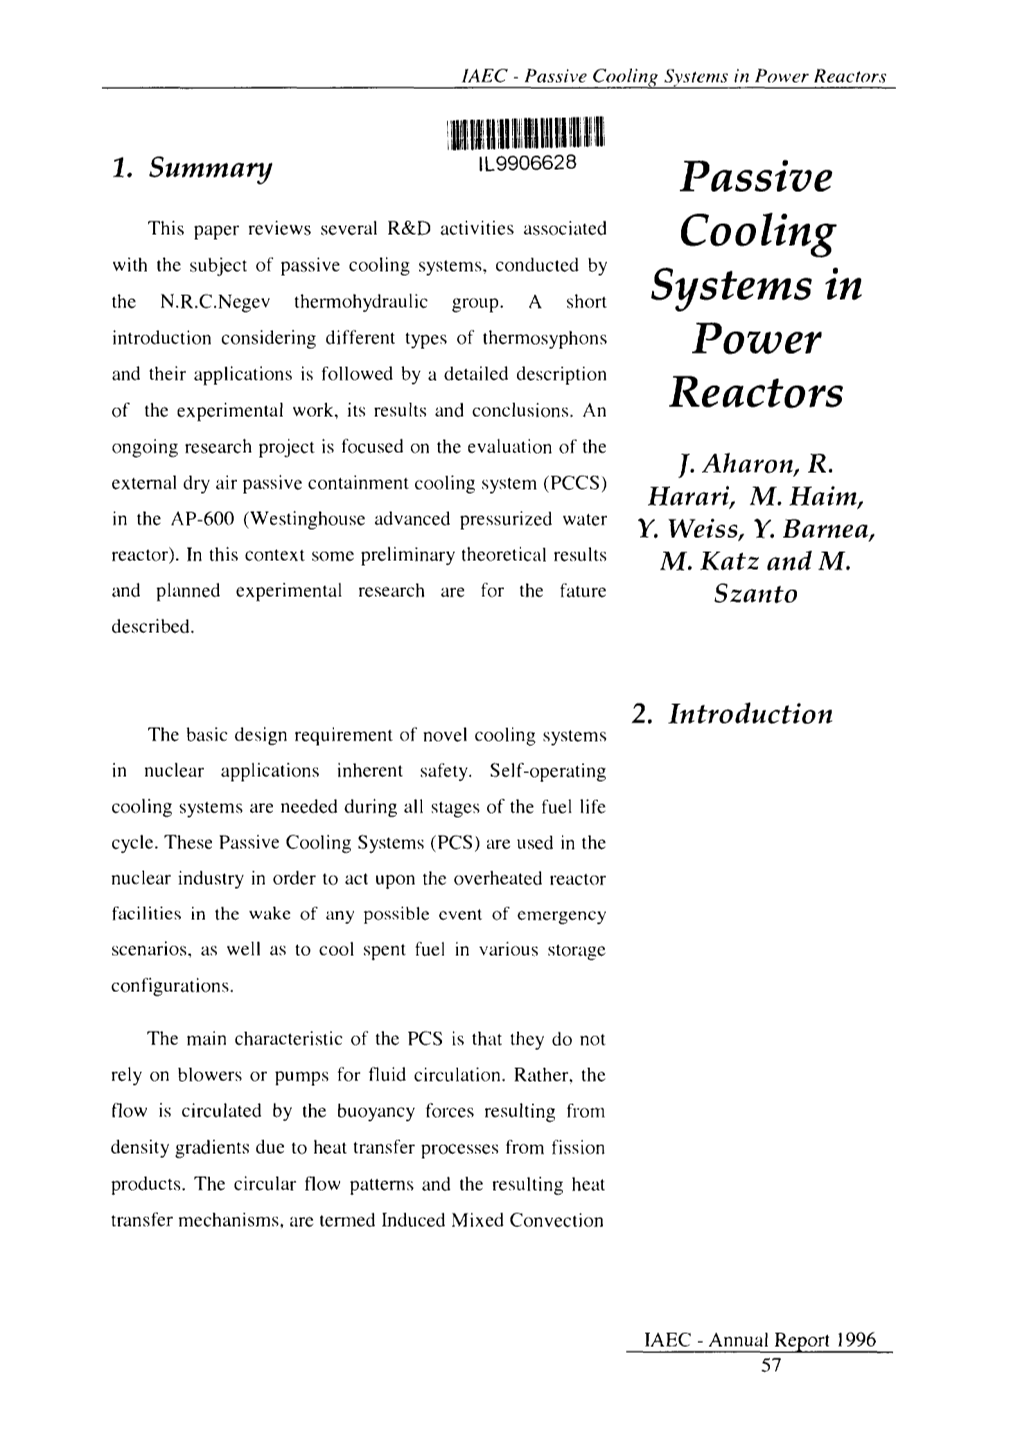 Passive Cooling Systems in Power Reactors